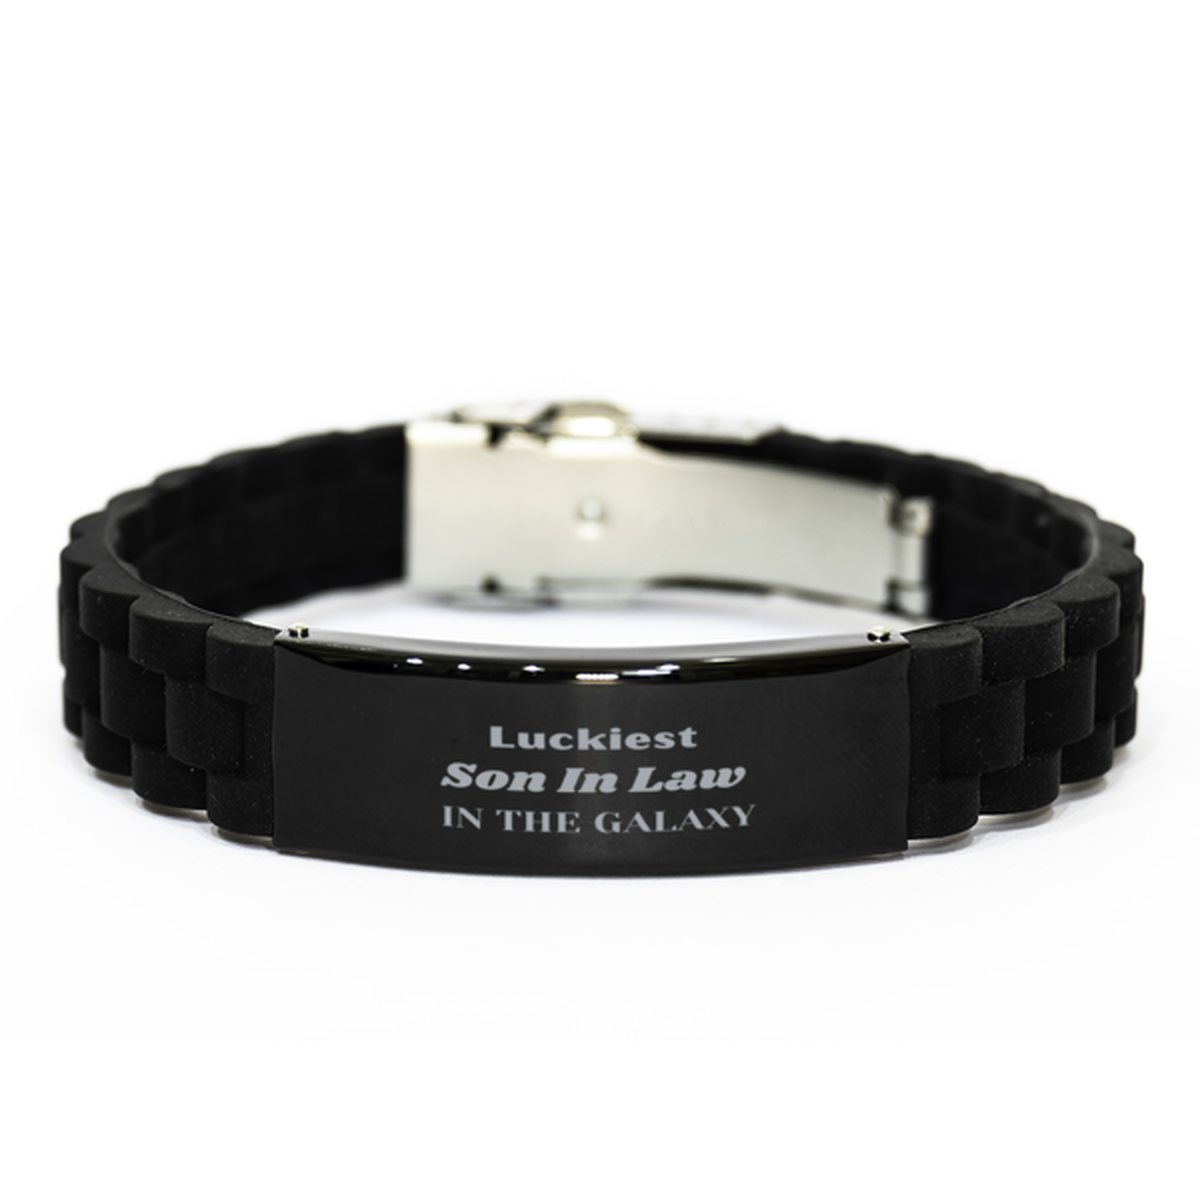 Luckiest Son In Law in the Galaxy, To My Son In Law Engraved Gifts, Christmas Son In Law Black Glidelock Clasp Bracelet Gifts, X-mas Birthday Unique Gifts For Son In Law Men Women